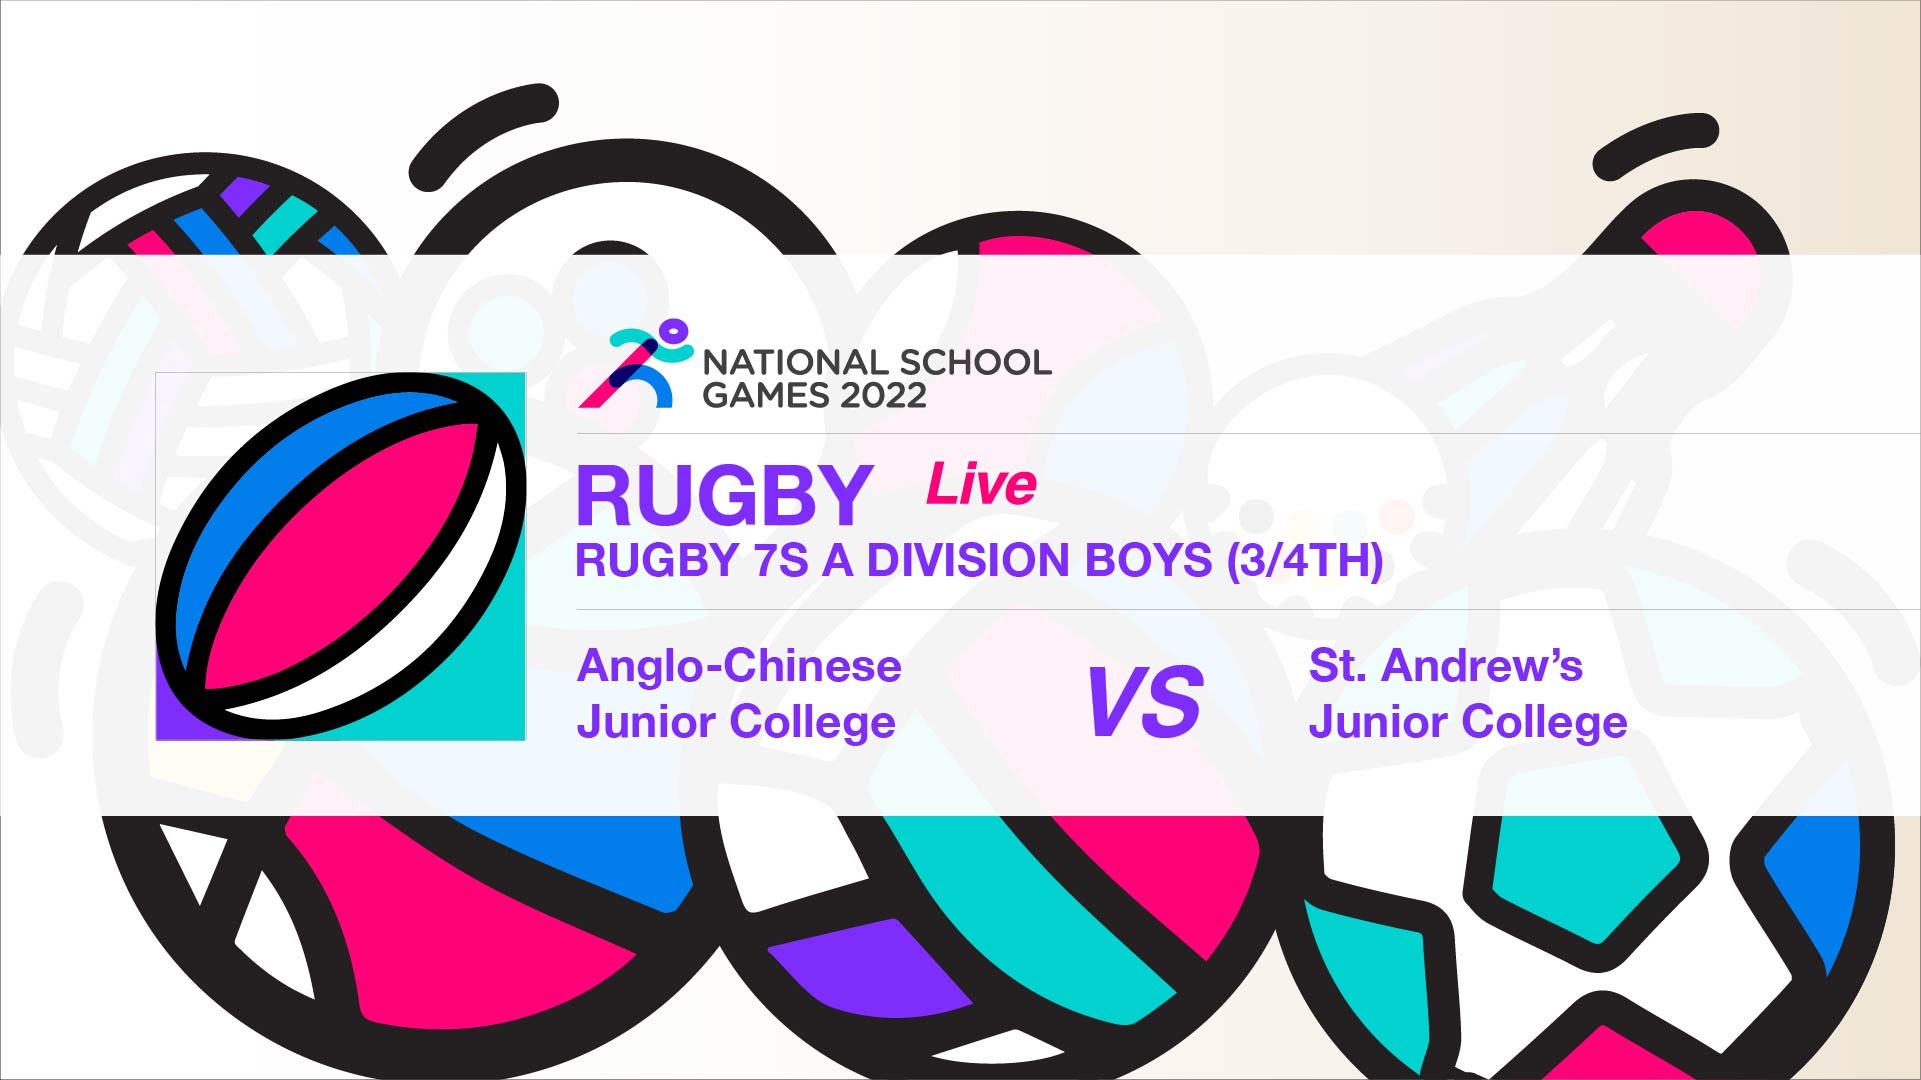 SSSC Rugby 7s A Division Boys 3rd/4th | Anglo-Chinese Junior College vs St. Andrew's Junior College